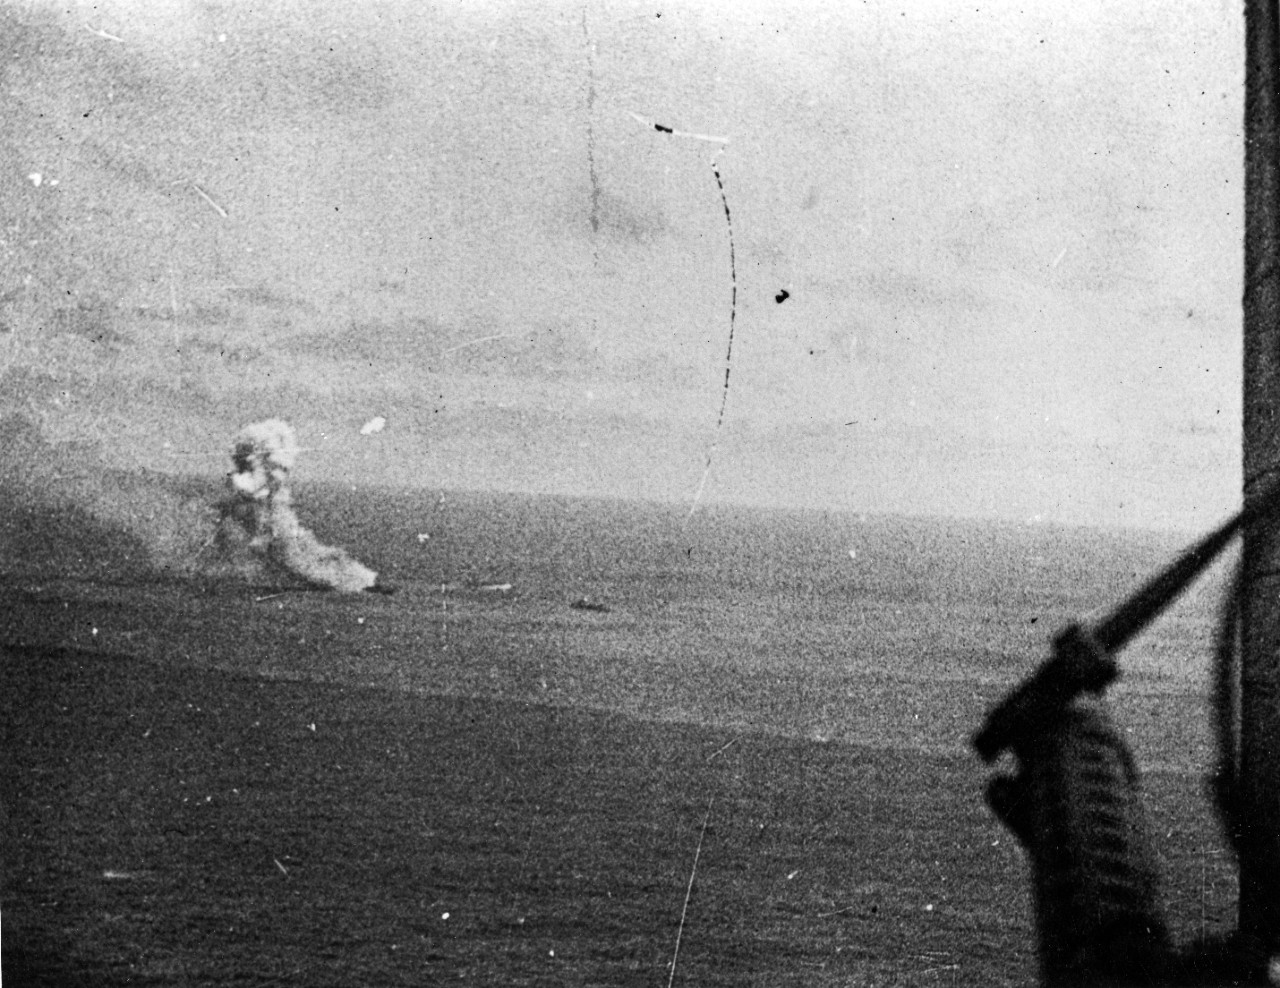 Photo #: 80-G-17055  Battle of Midway, June 1942